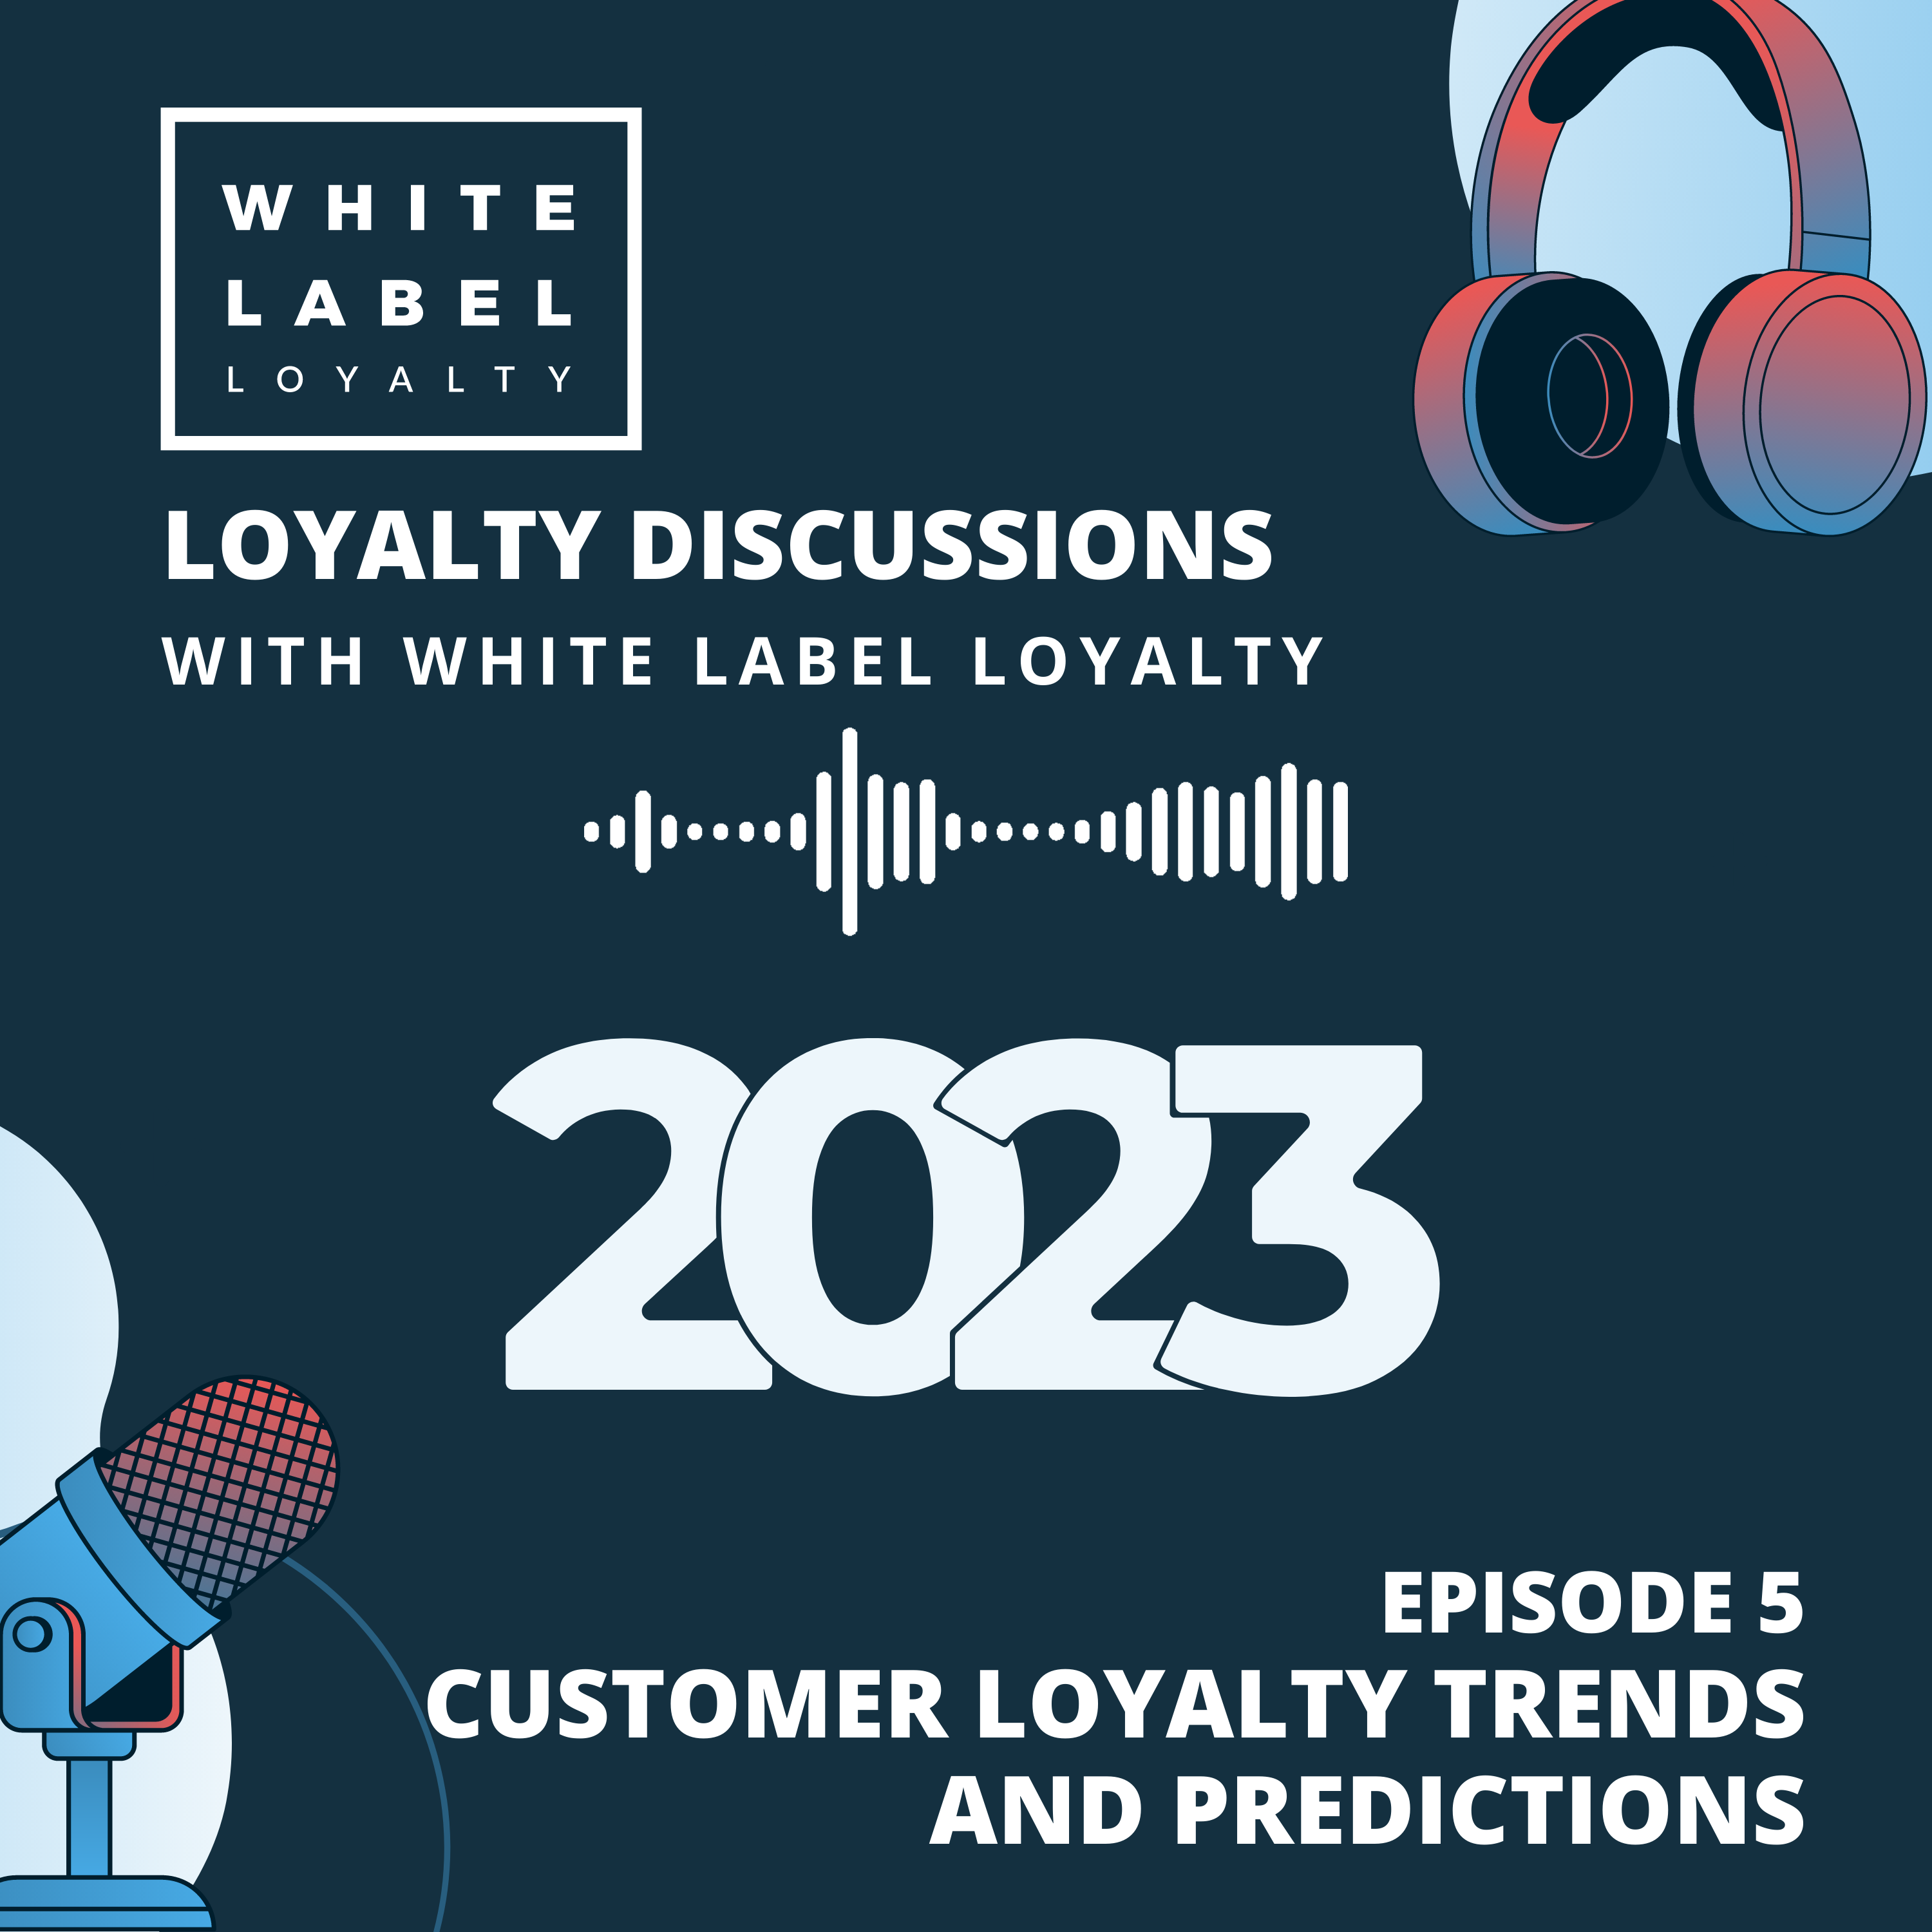 2023 Customer Loyalty Trends and Predictions